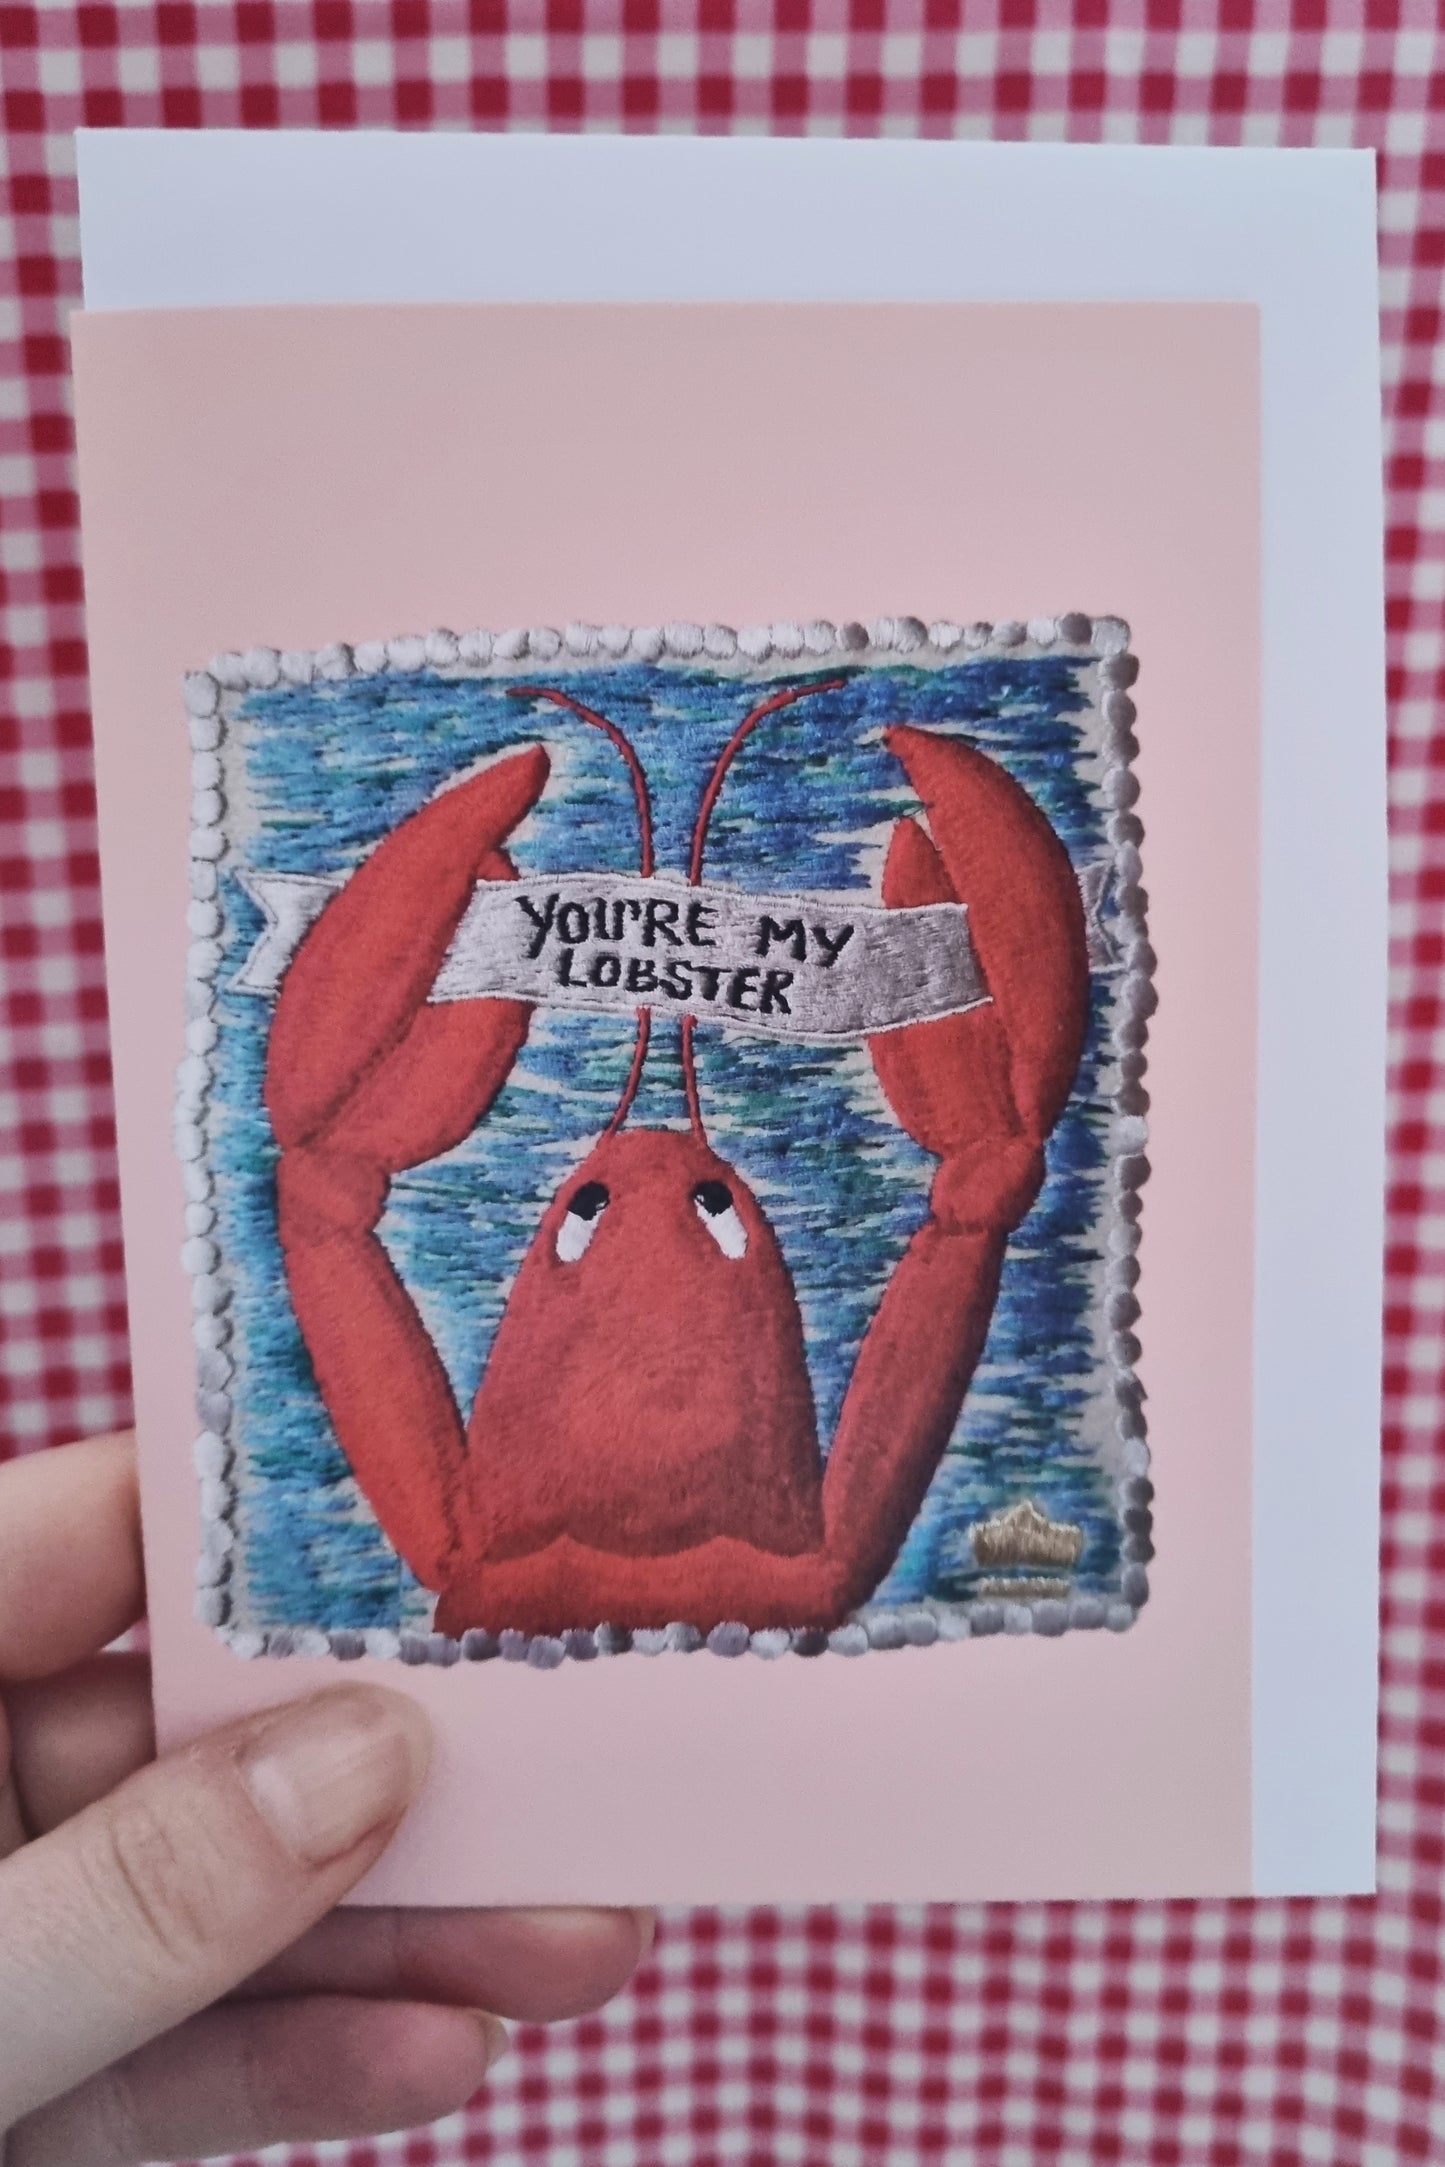 Kate's hand holding a pink card with an image of an embroidered lobster stampf